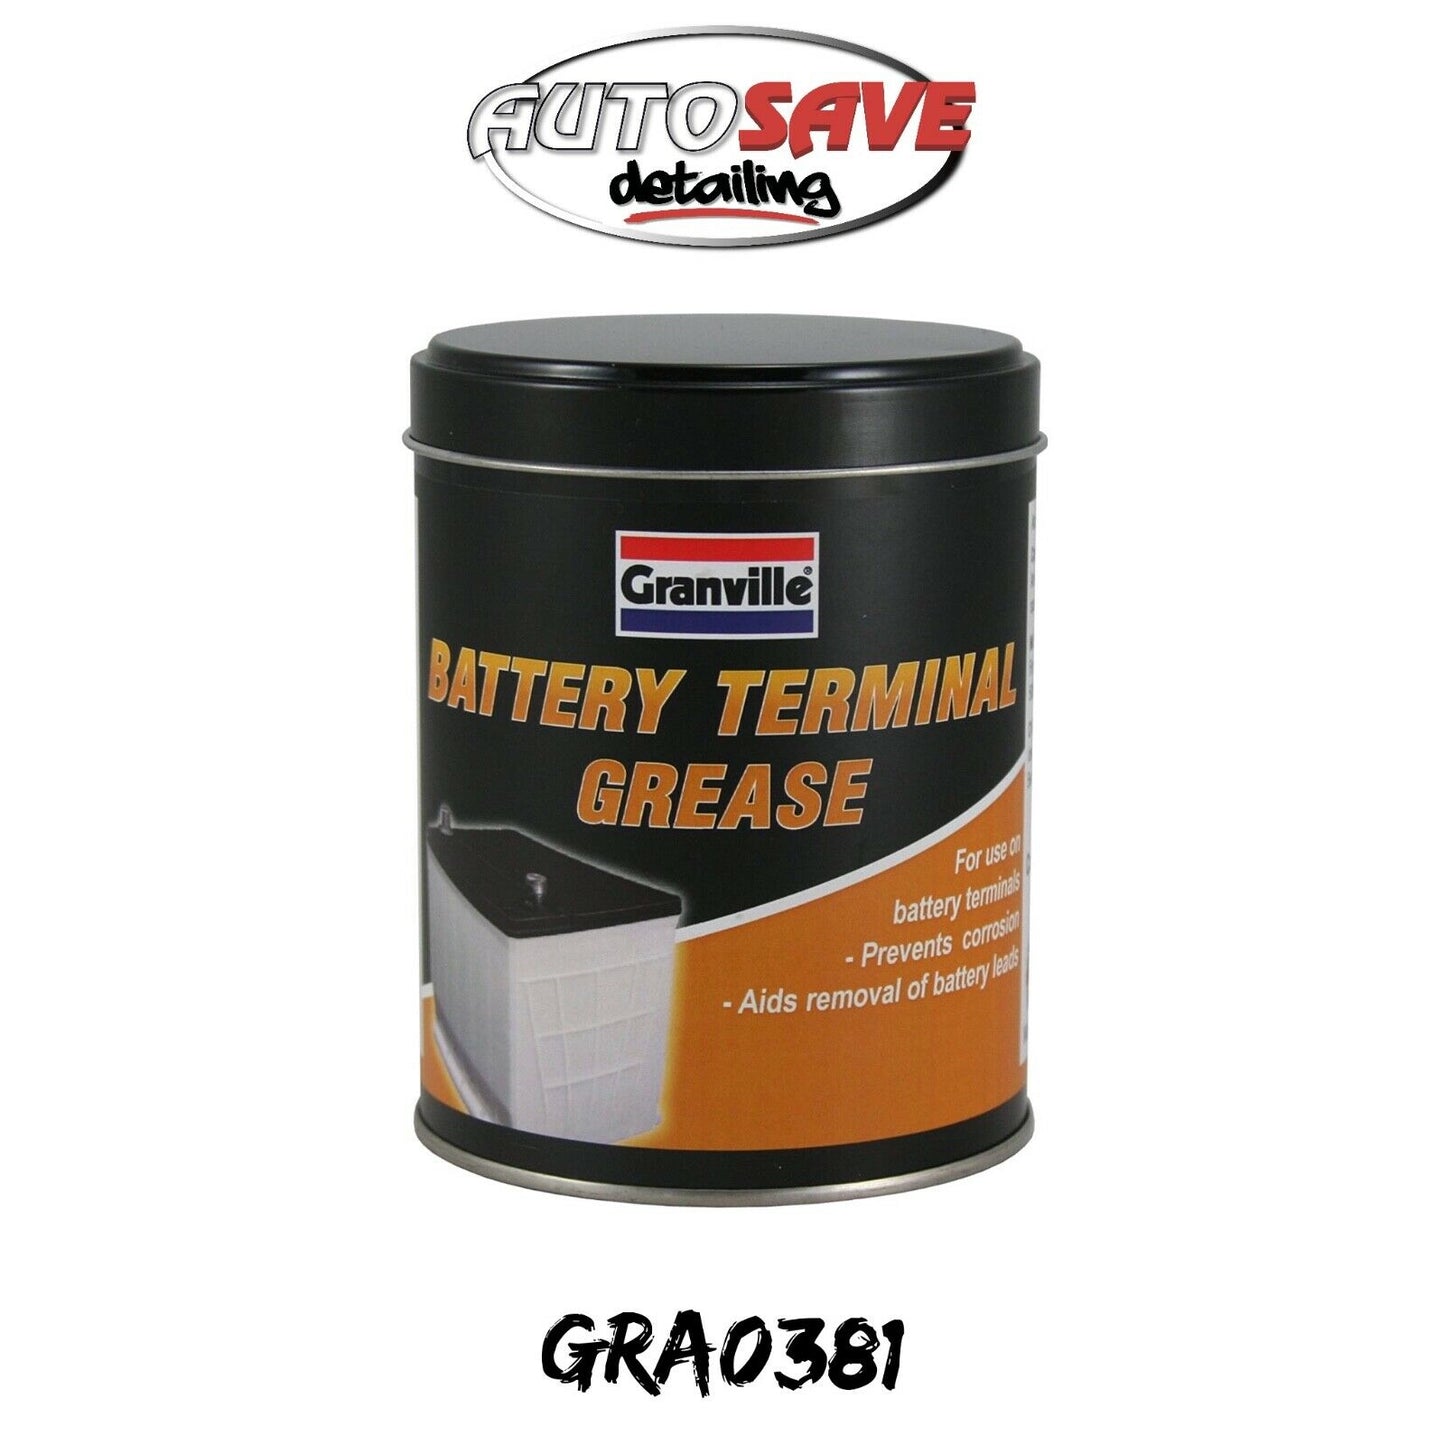 Granville Battery Terminal Grease Electrical Contact Prevents Corrosion 500g